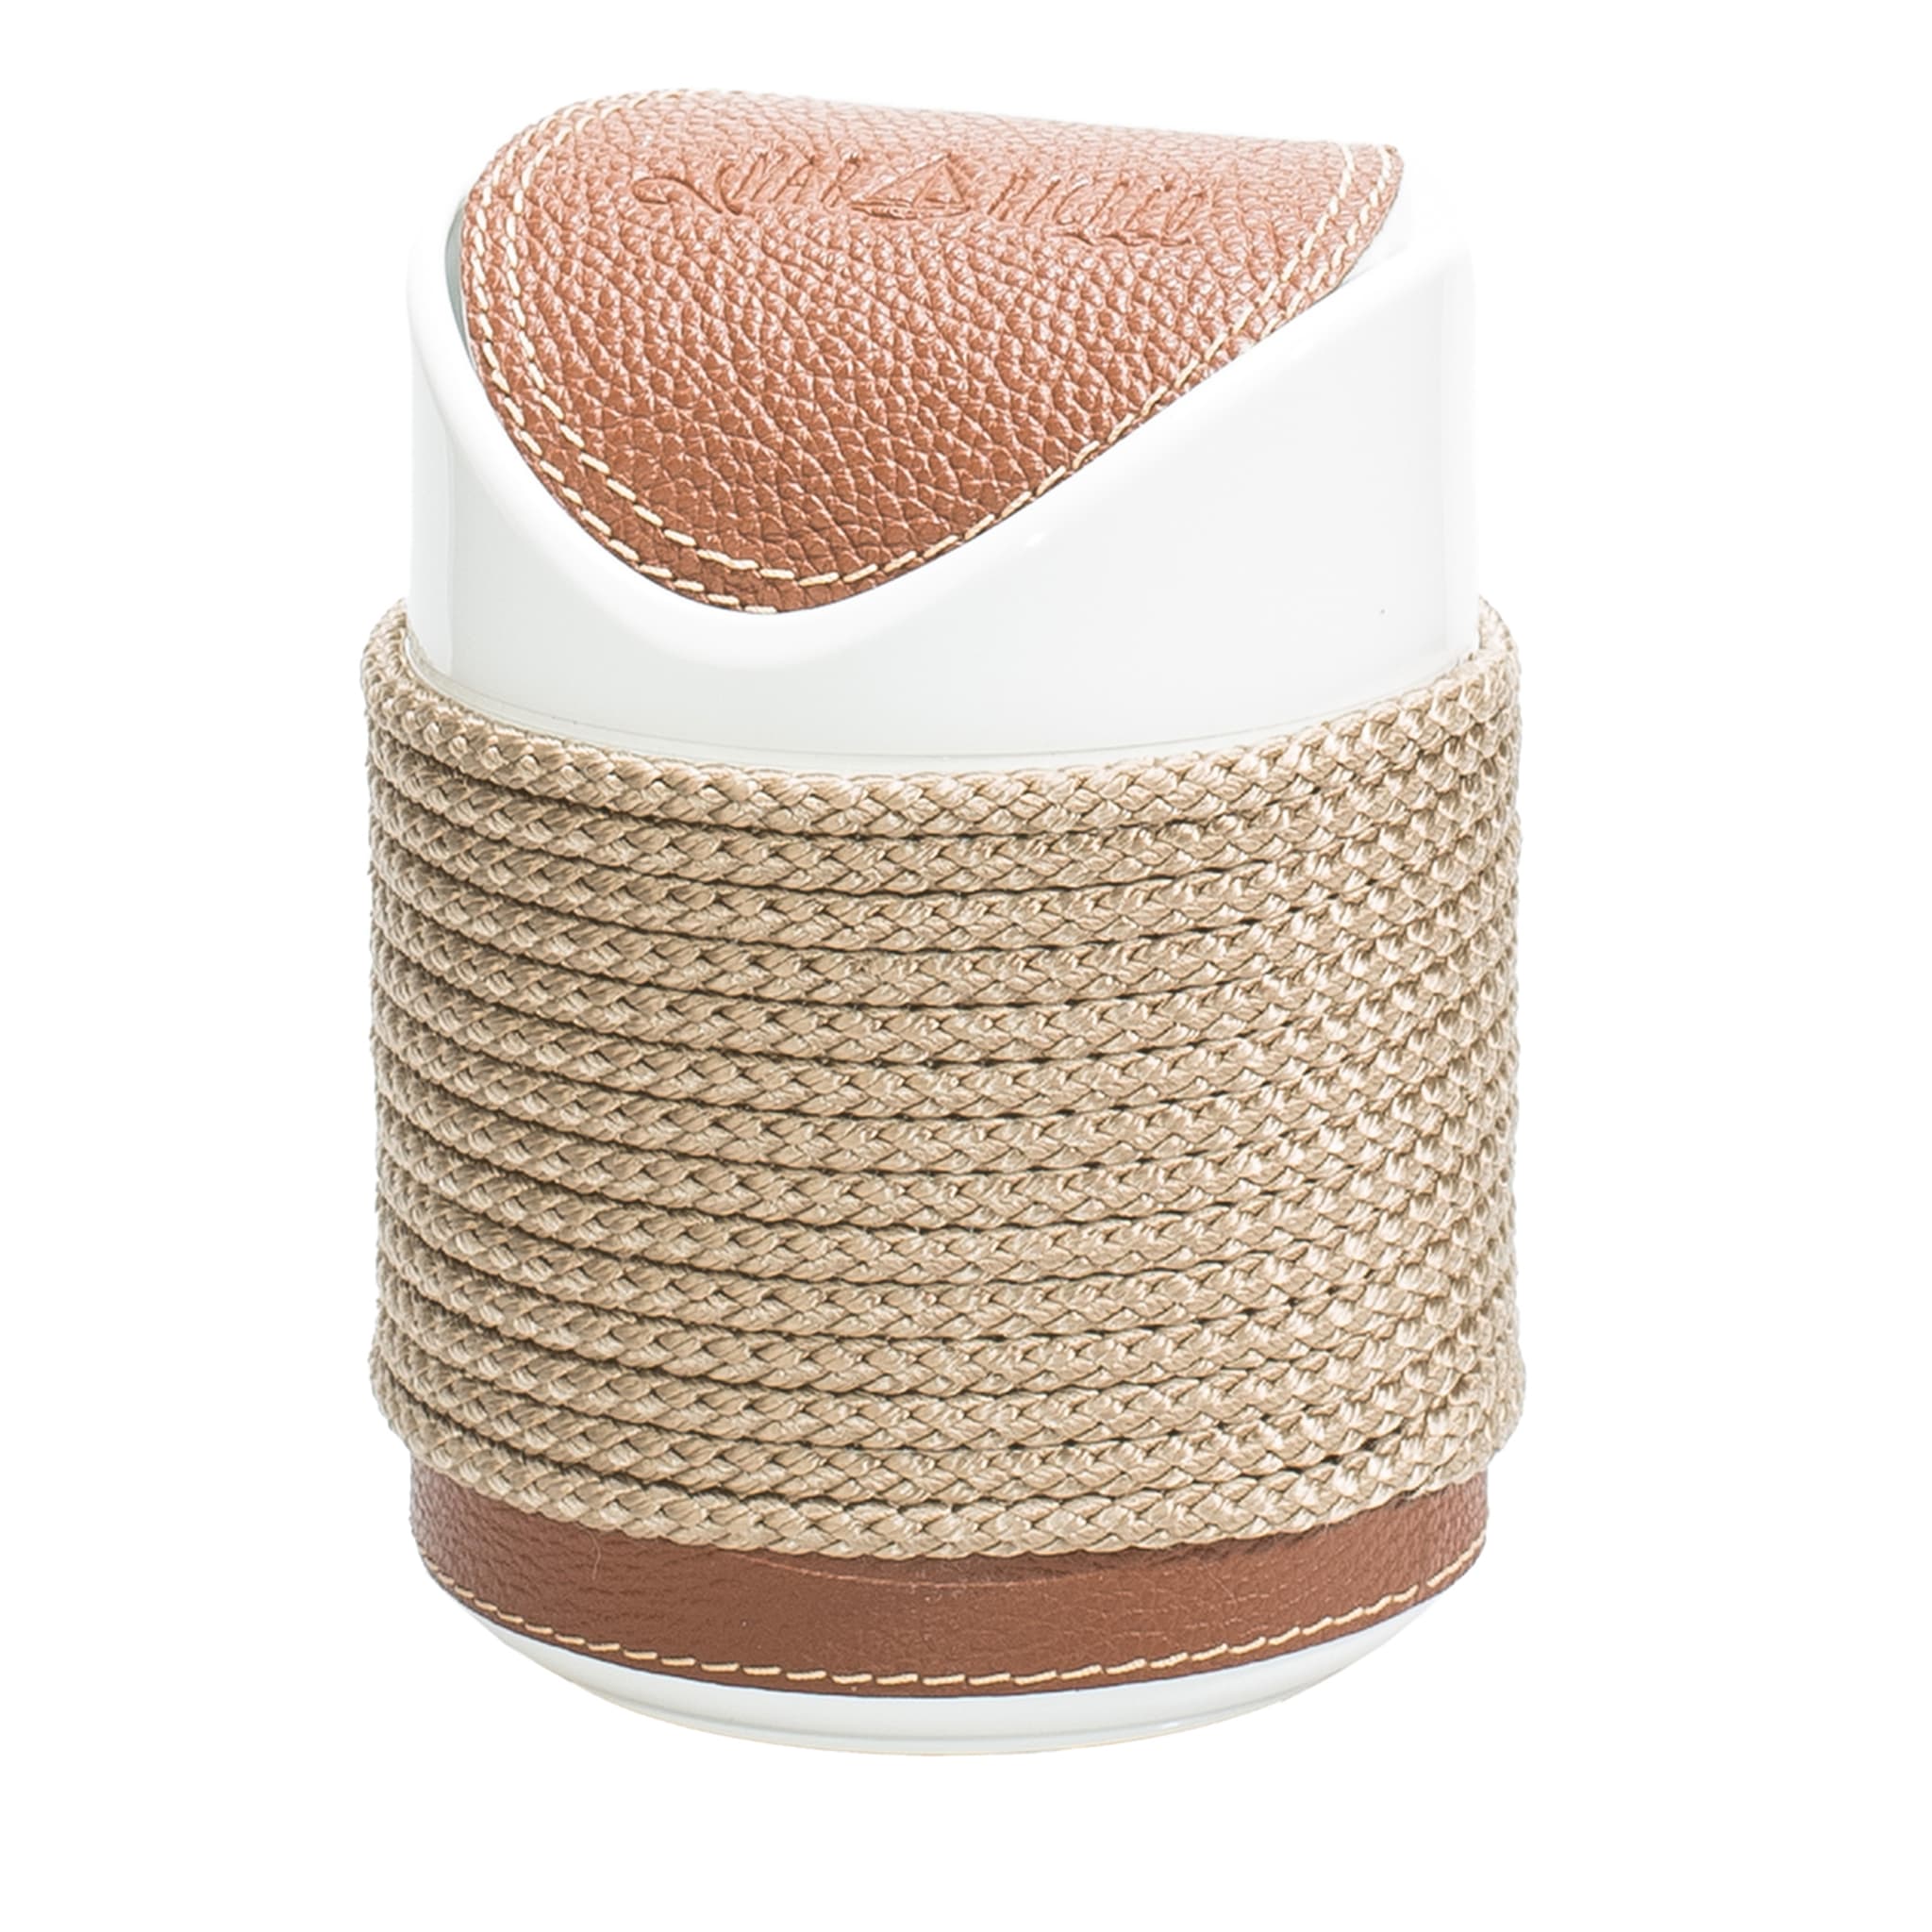 Bon Ton Bin with Beige Eco-Leather and Rope Inserts by Guzzini - Main view